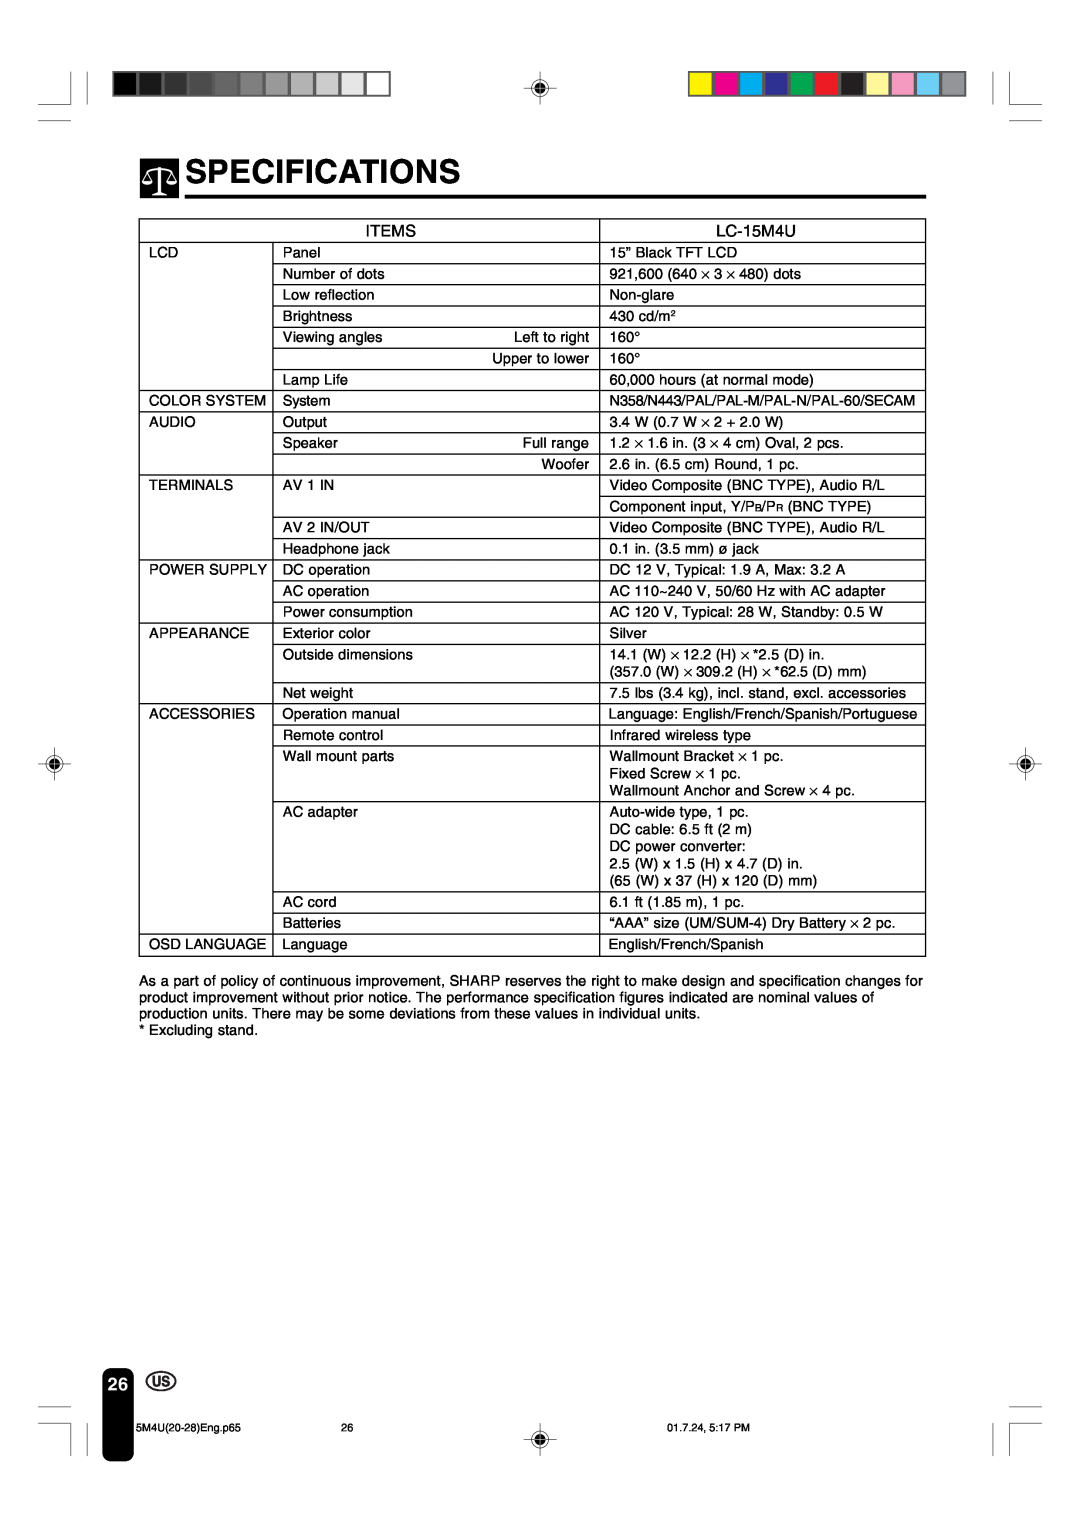 Sharp LC-15M4U operation manual Specifications, Items 